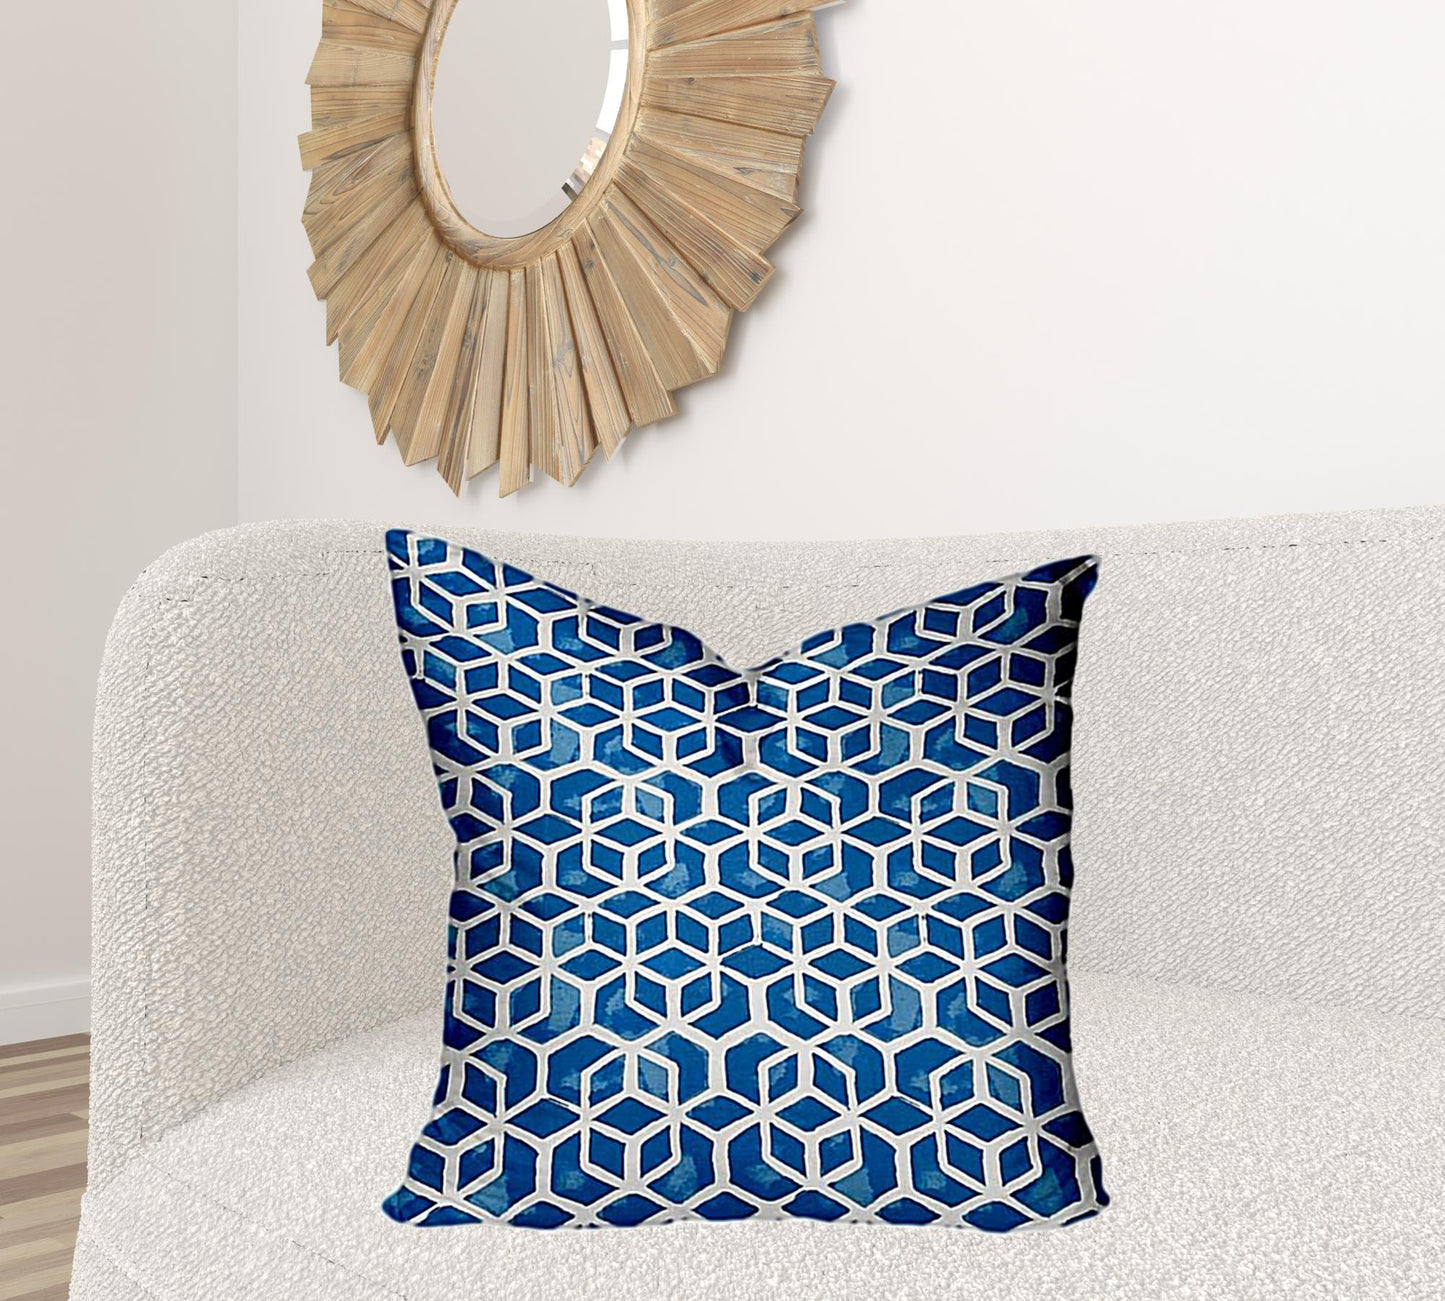 26" X 26" Blue And White Zippered Geometric Throw Indoor Outdoor Pillow